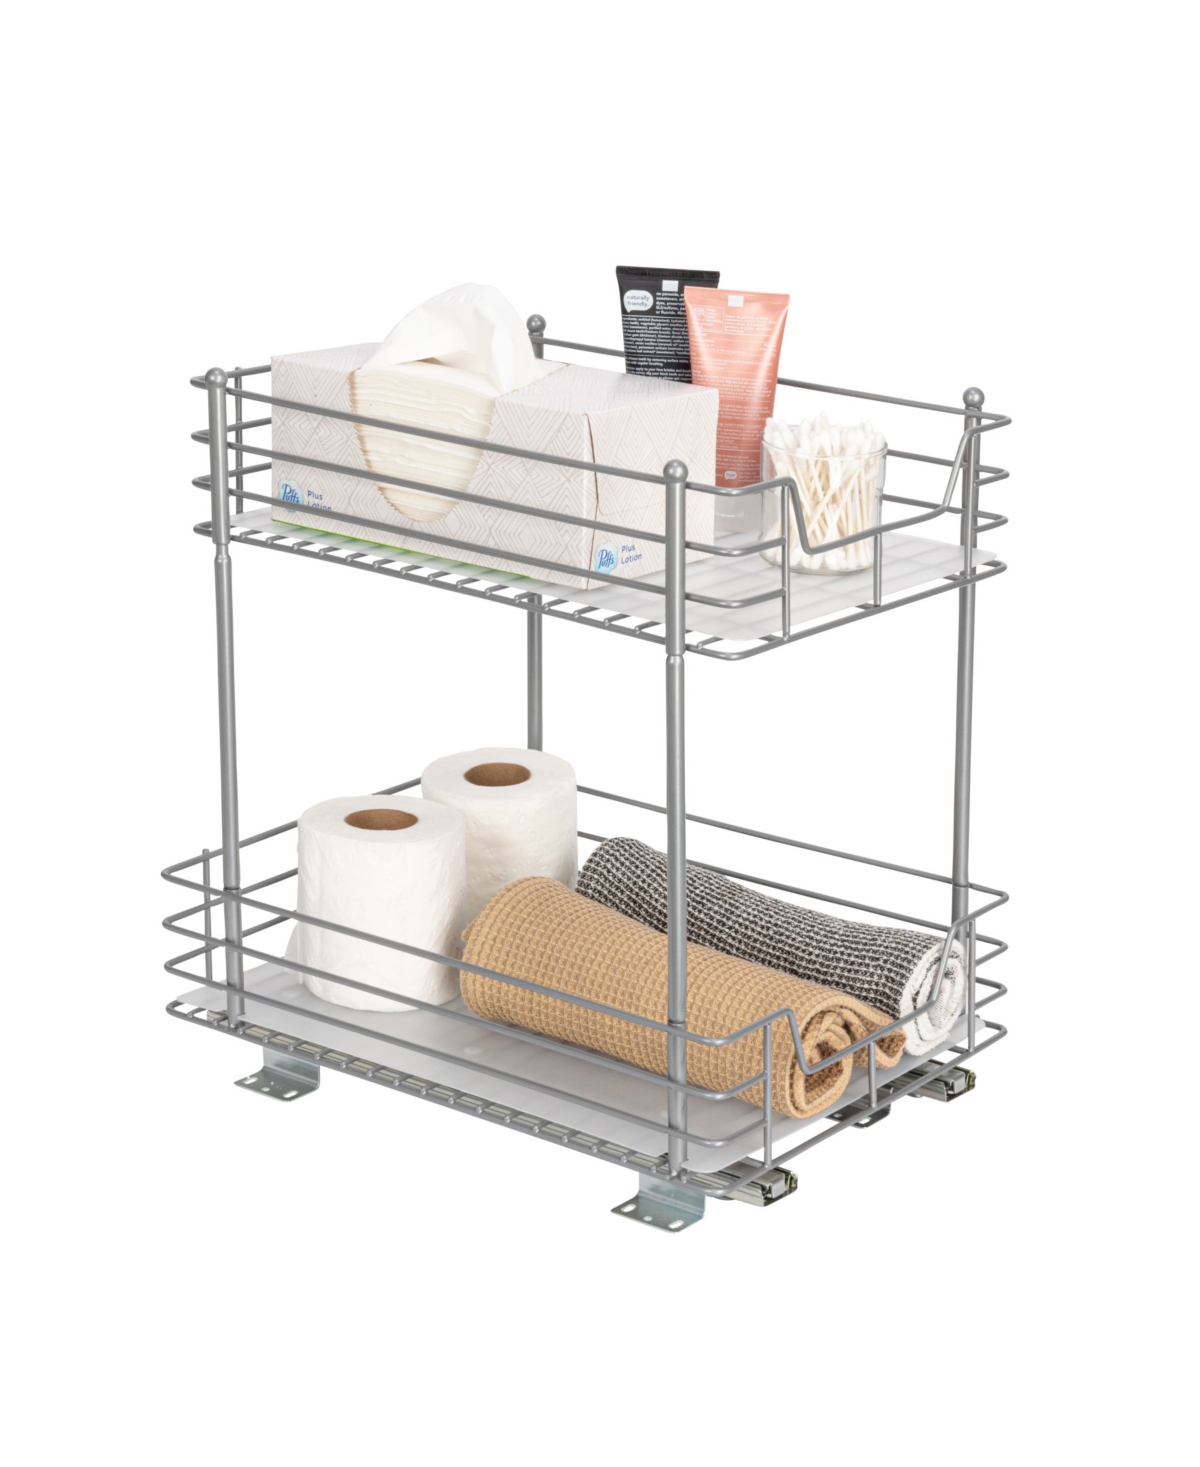 Glidez Steel Pull-Out/Slide-Out Storage Organizer with Plastic Liners for Under Cabinet or Wire Shelf 2-Tier Design - Silver